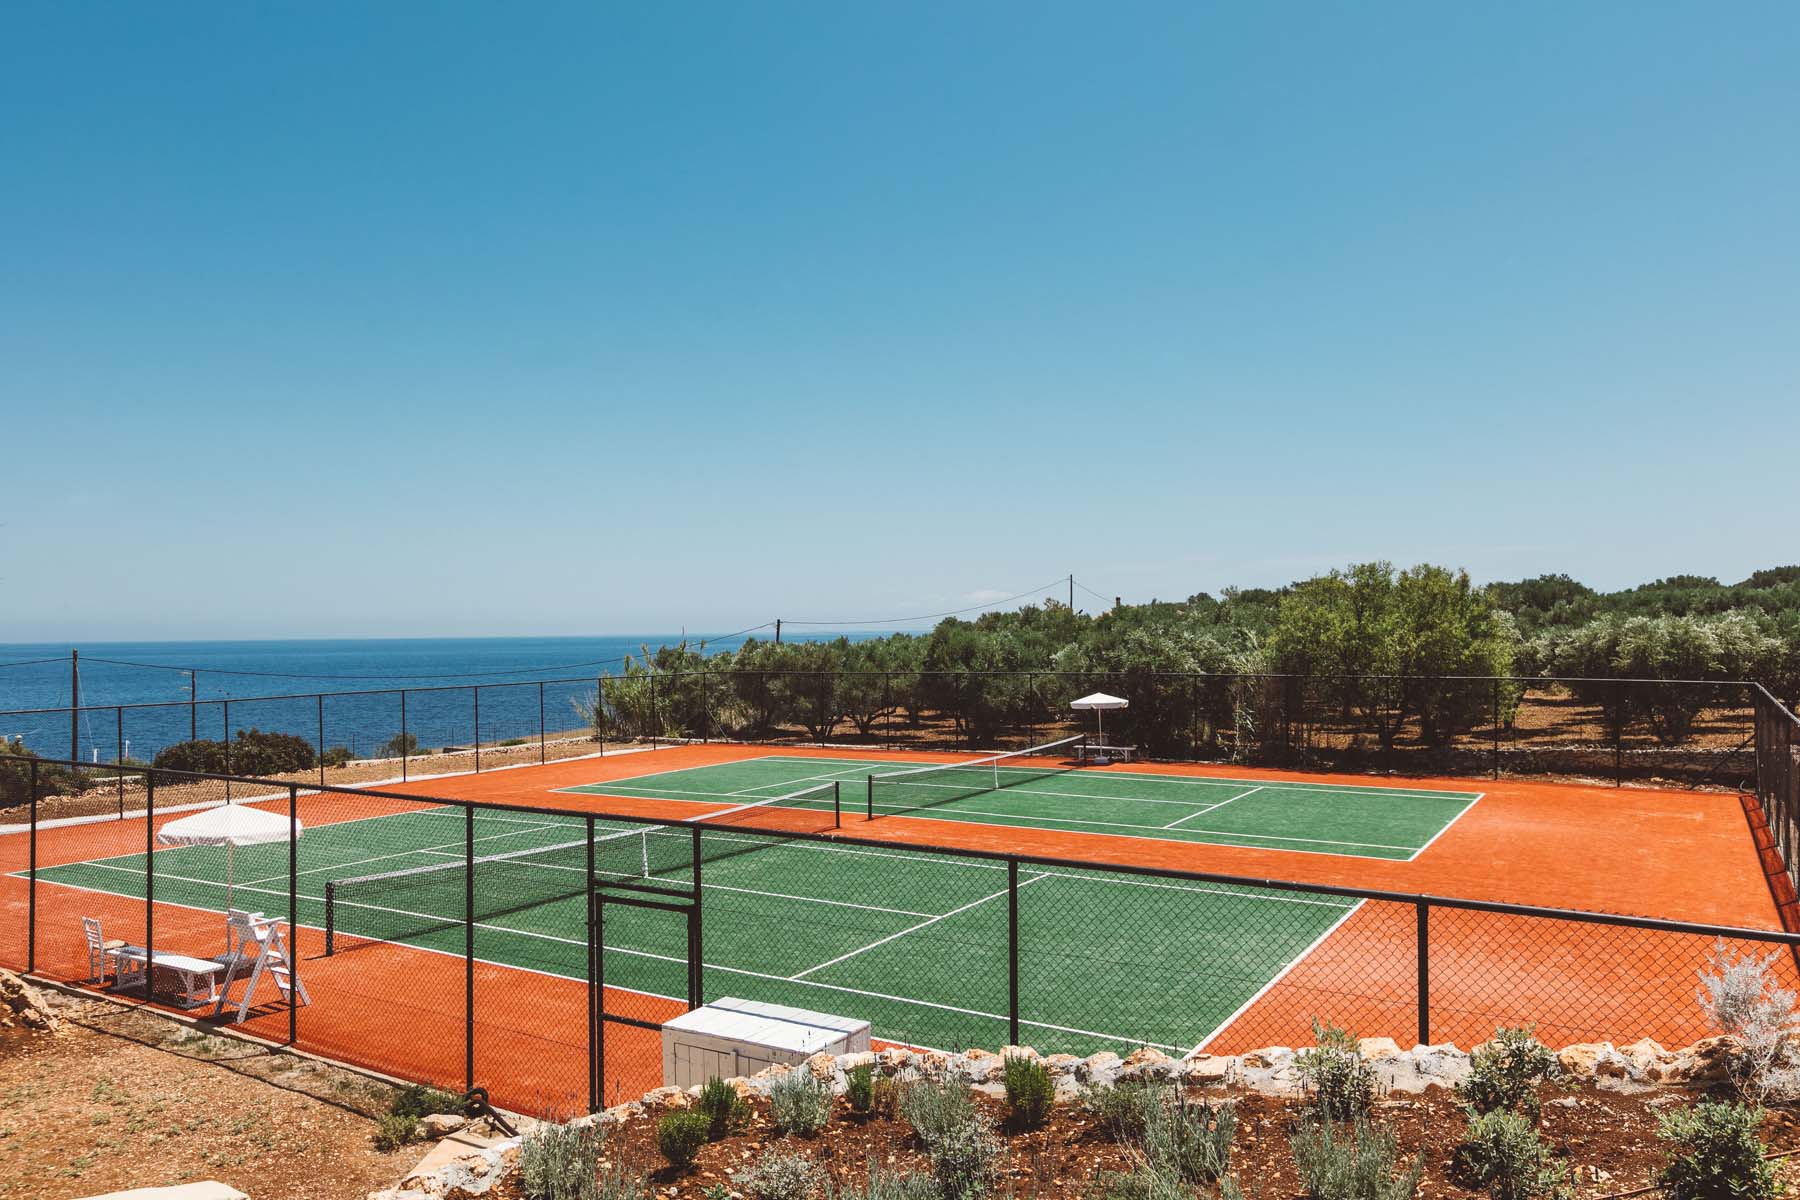 Two AstroTurf tennis courts